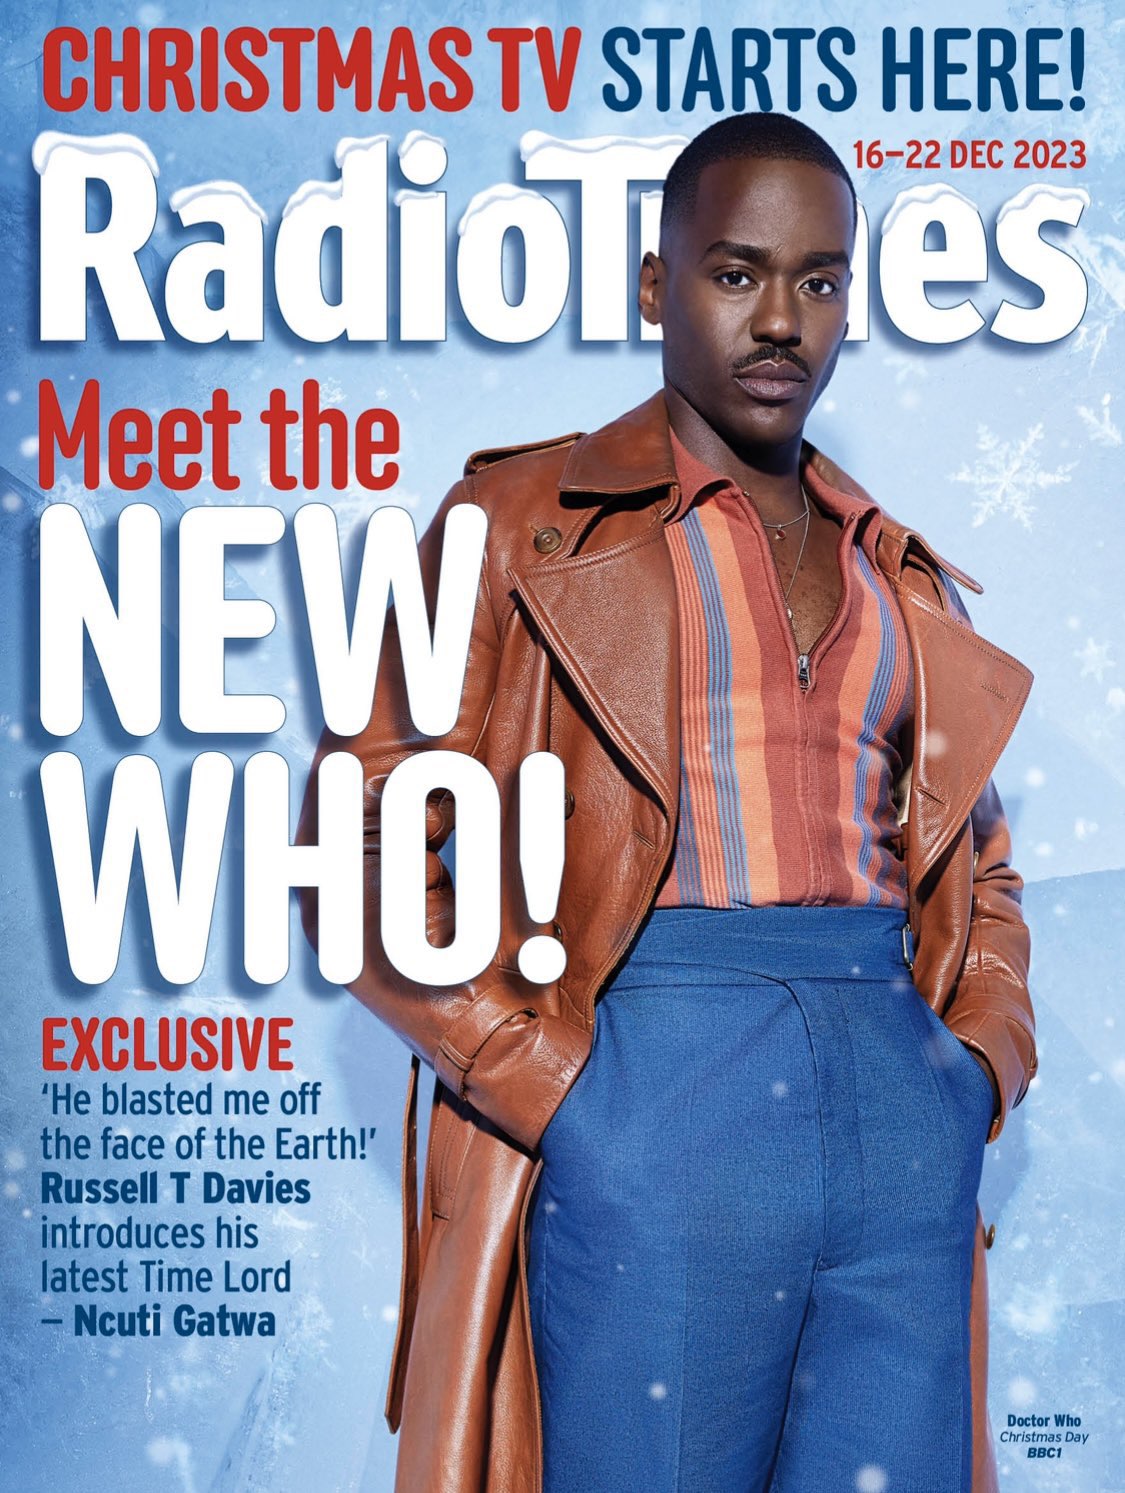 Radio Times 16 December 2023 (retail cover)